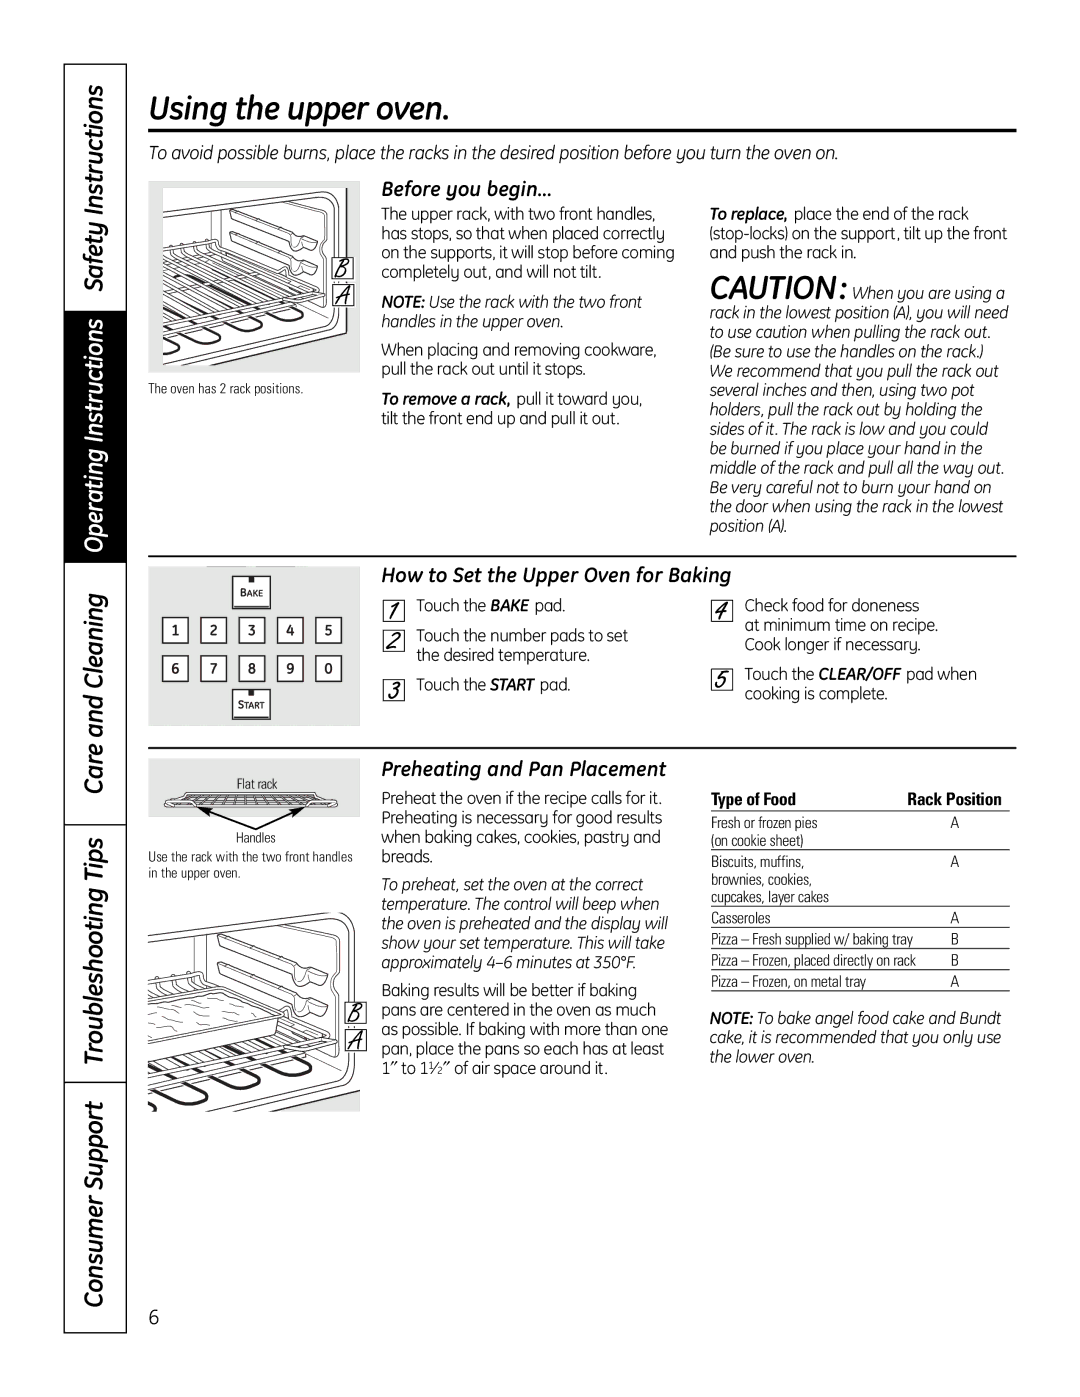 GE PT925 manual Using the upper oven, Instructions, Cleaning, Consumer Support Troubleshooting Tips Care 